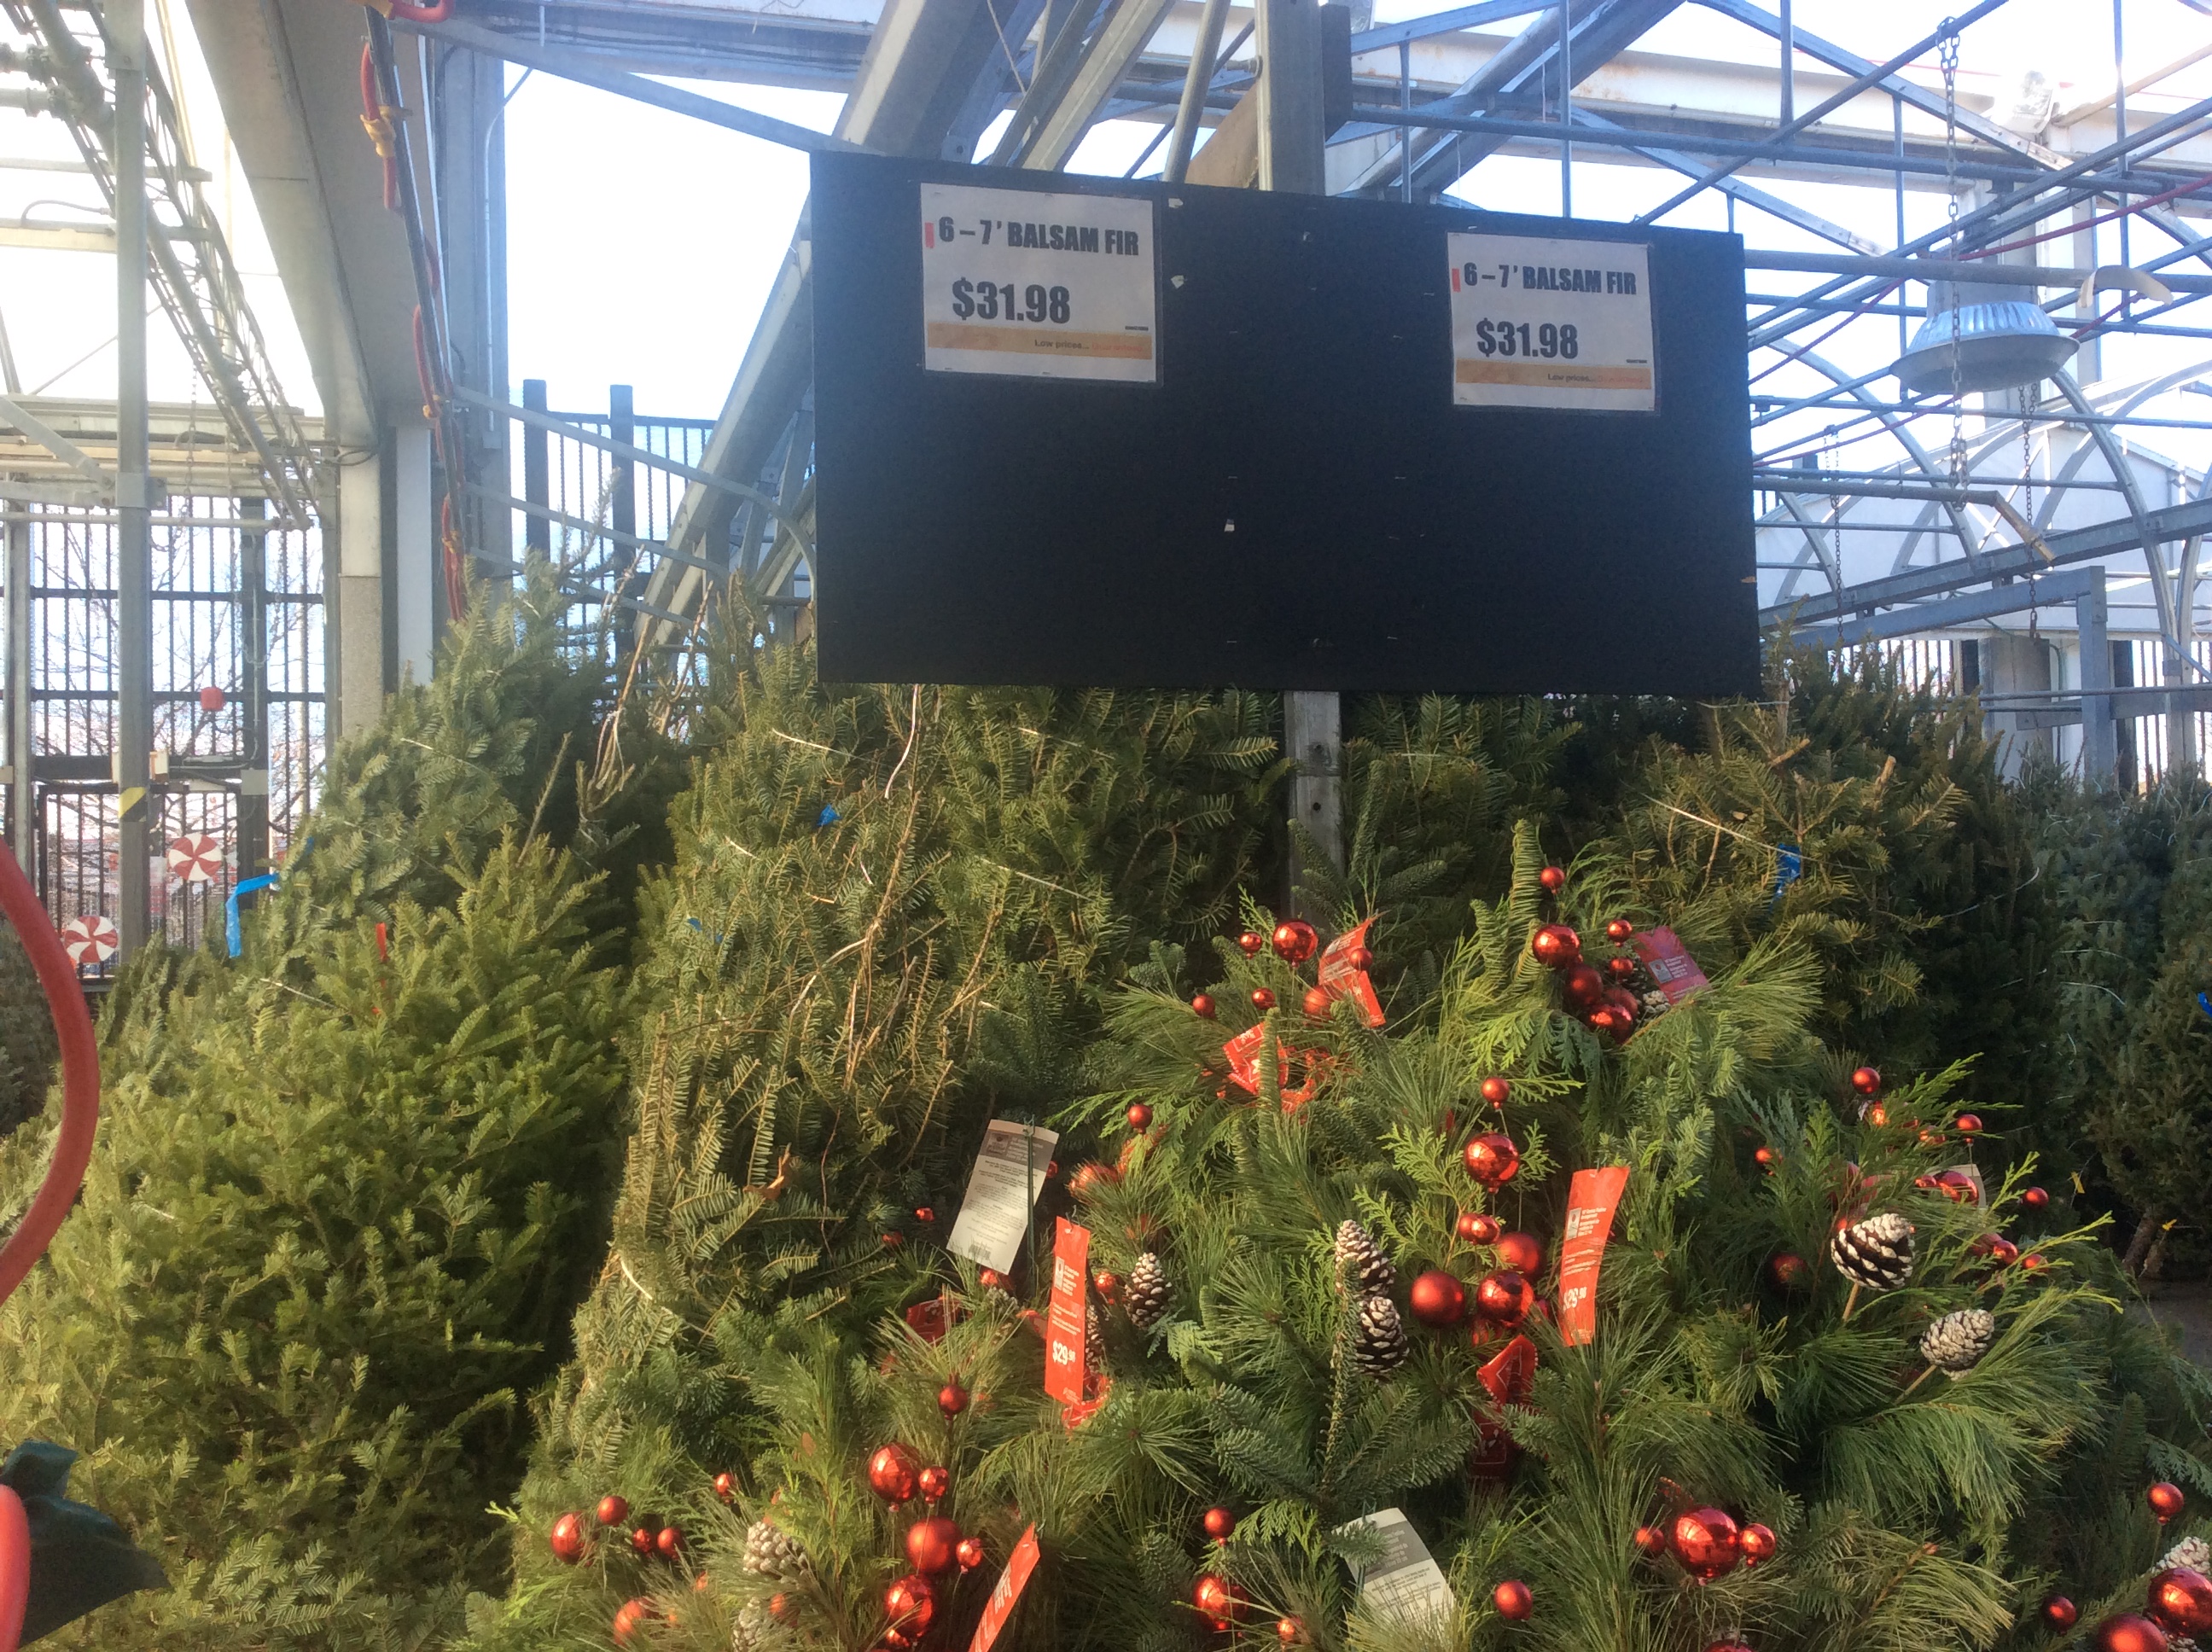 Balsam fir trees and mixed greenery decorations